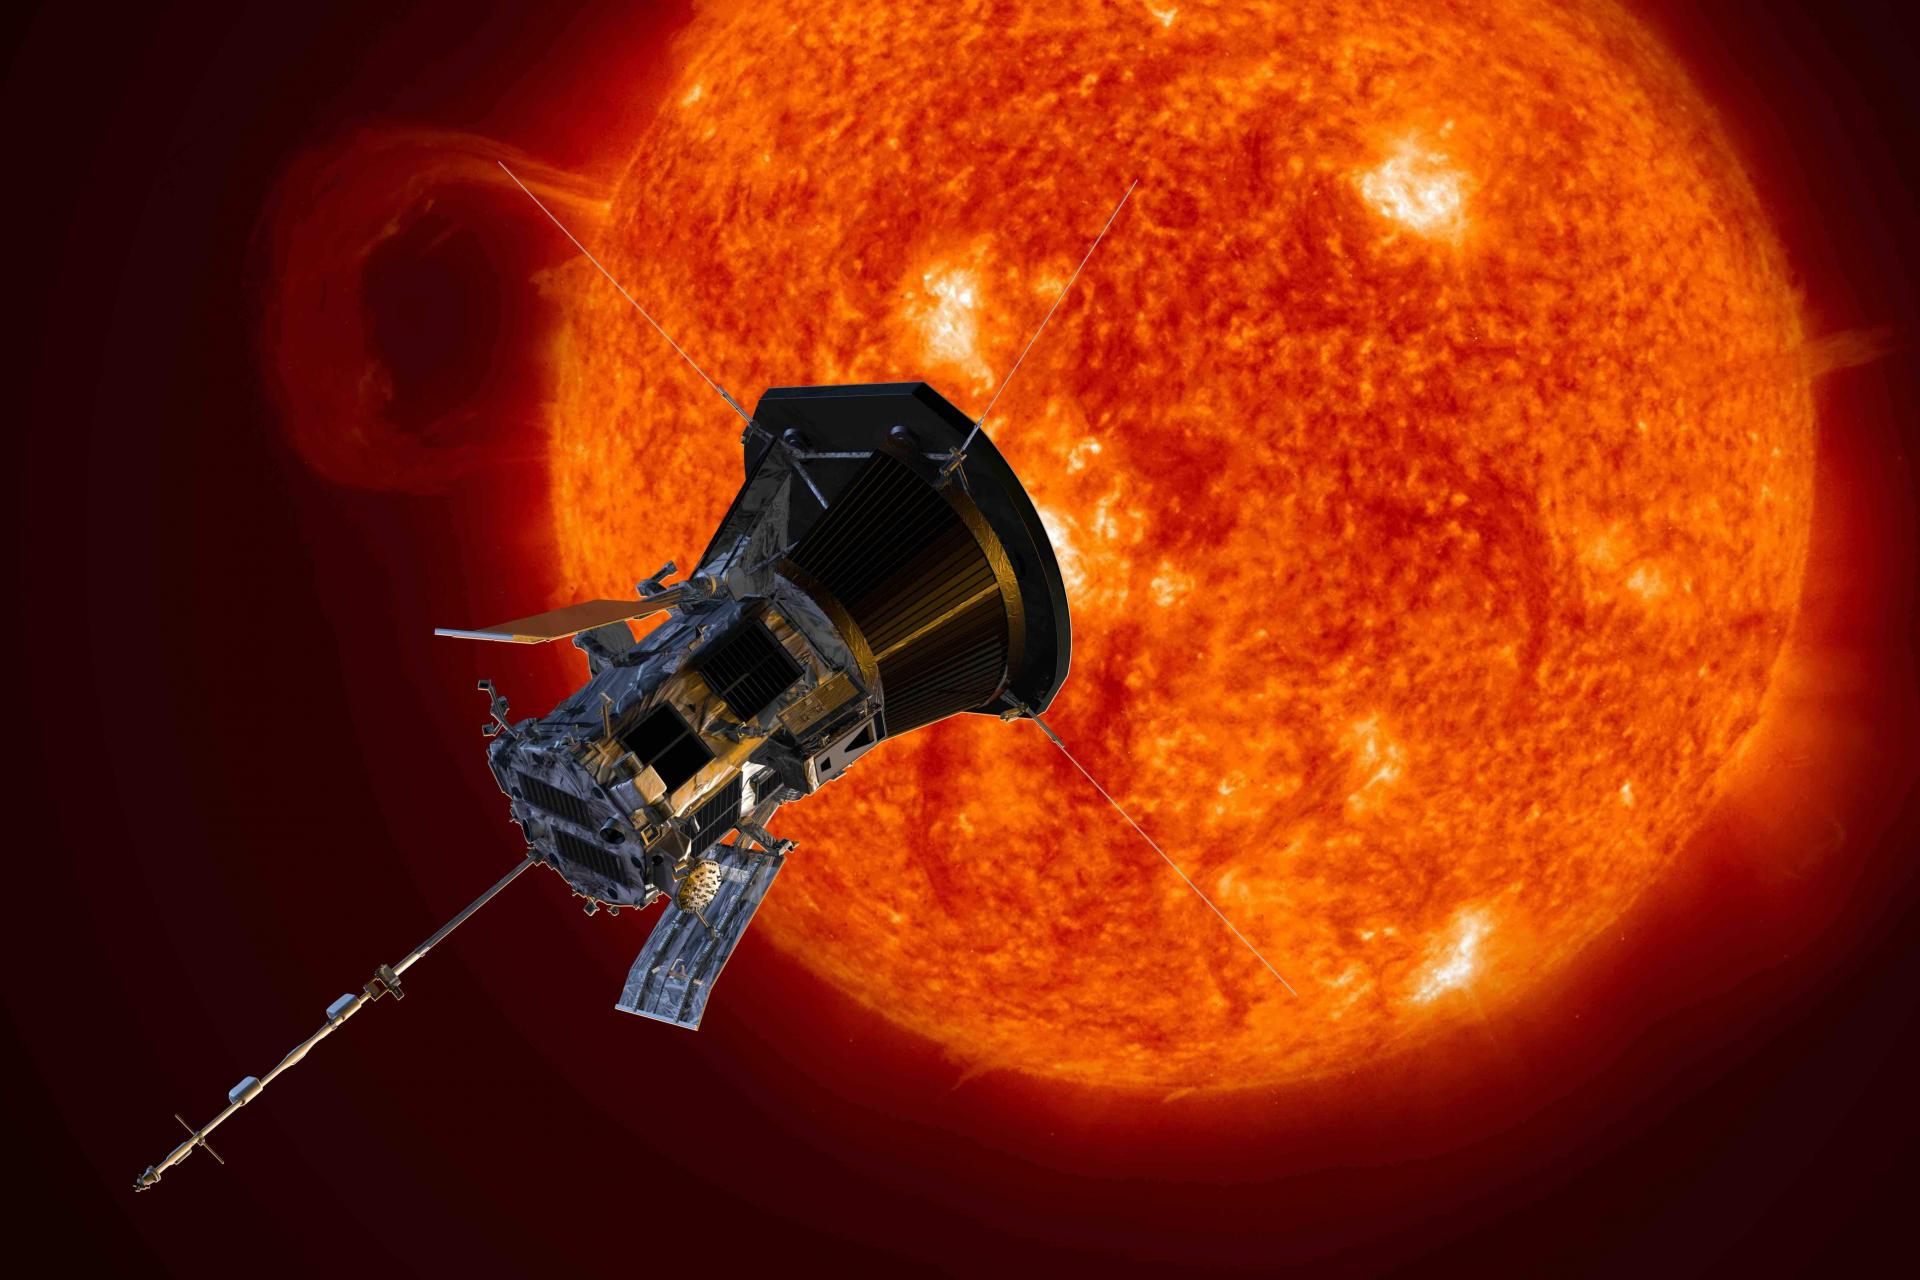 Artist’s rendering of the Parker Solar Probe spacecraft flying close to the Sun.